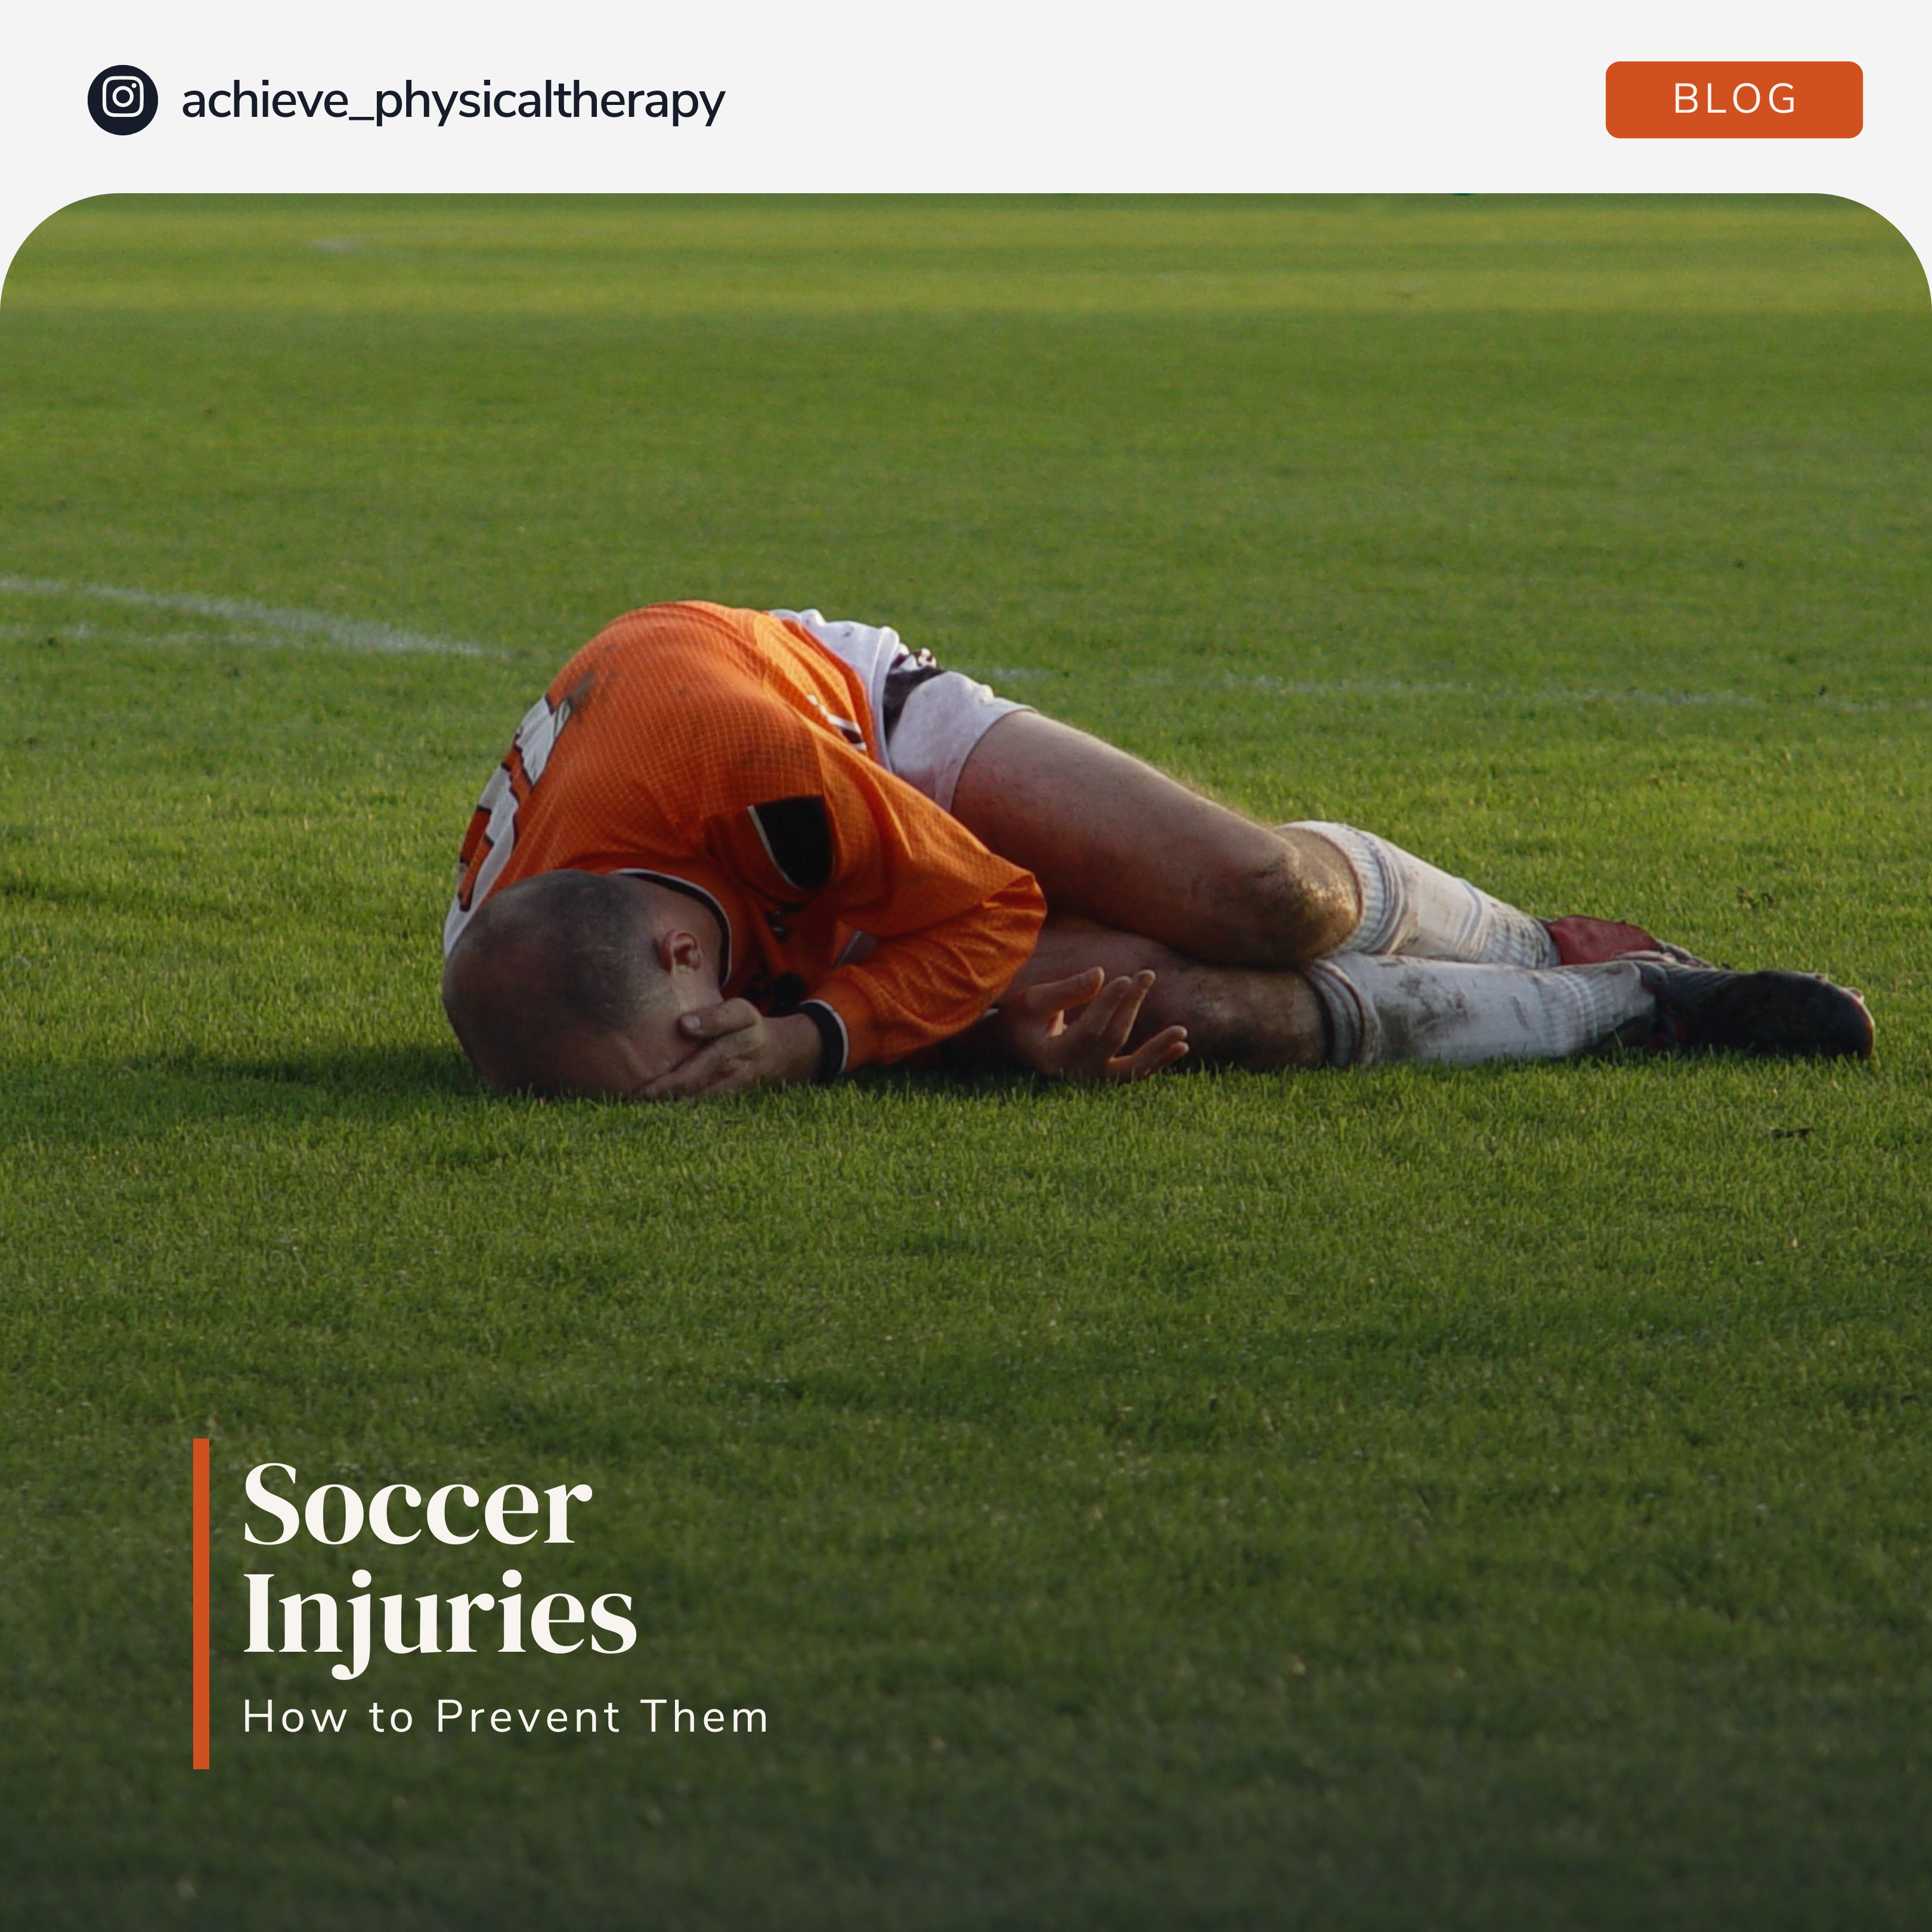 prevent most common soccer injuries, prevent soccer injuries